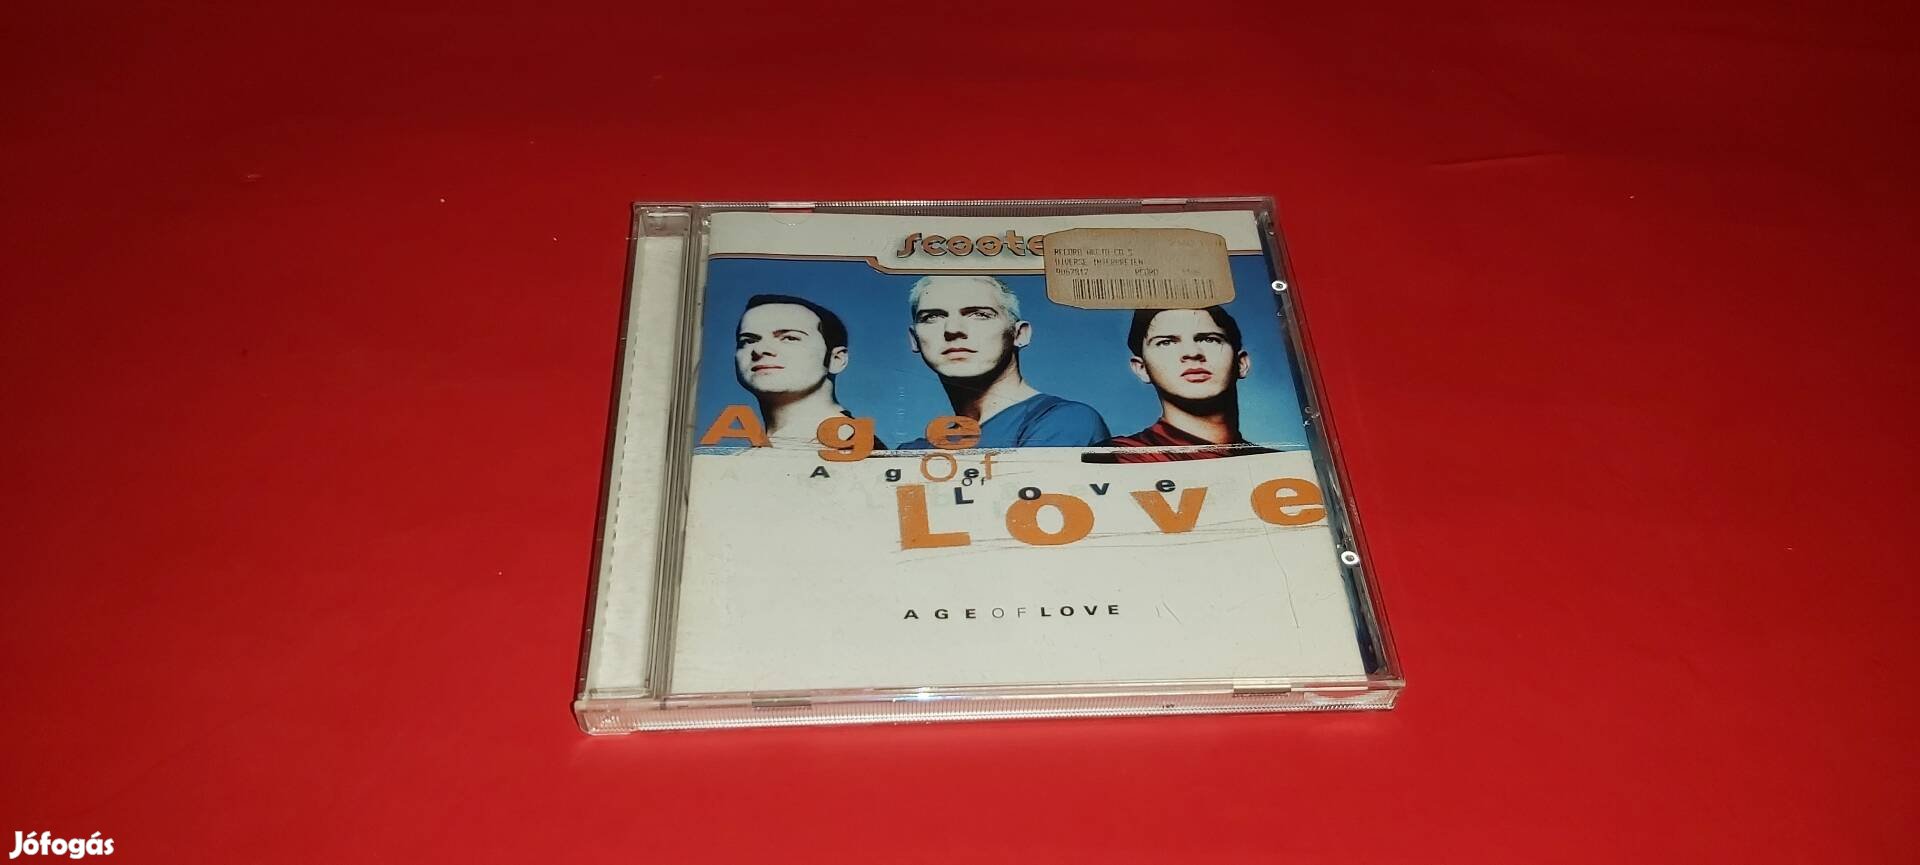 Scooter Age of love Cd 1997